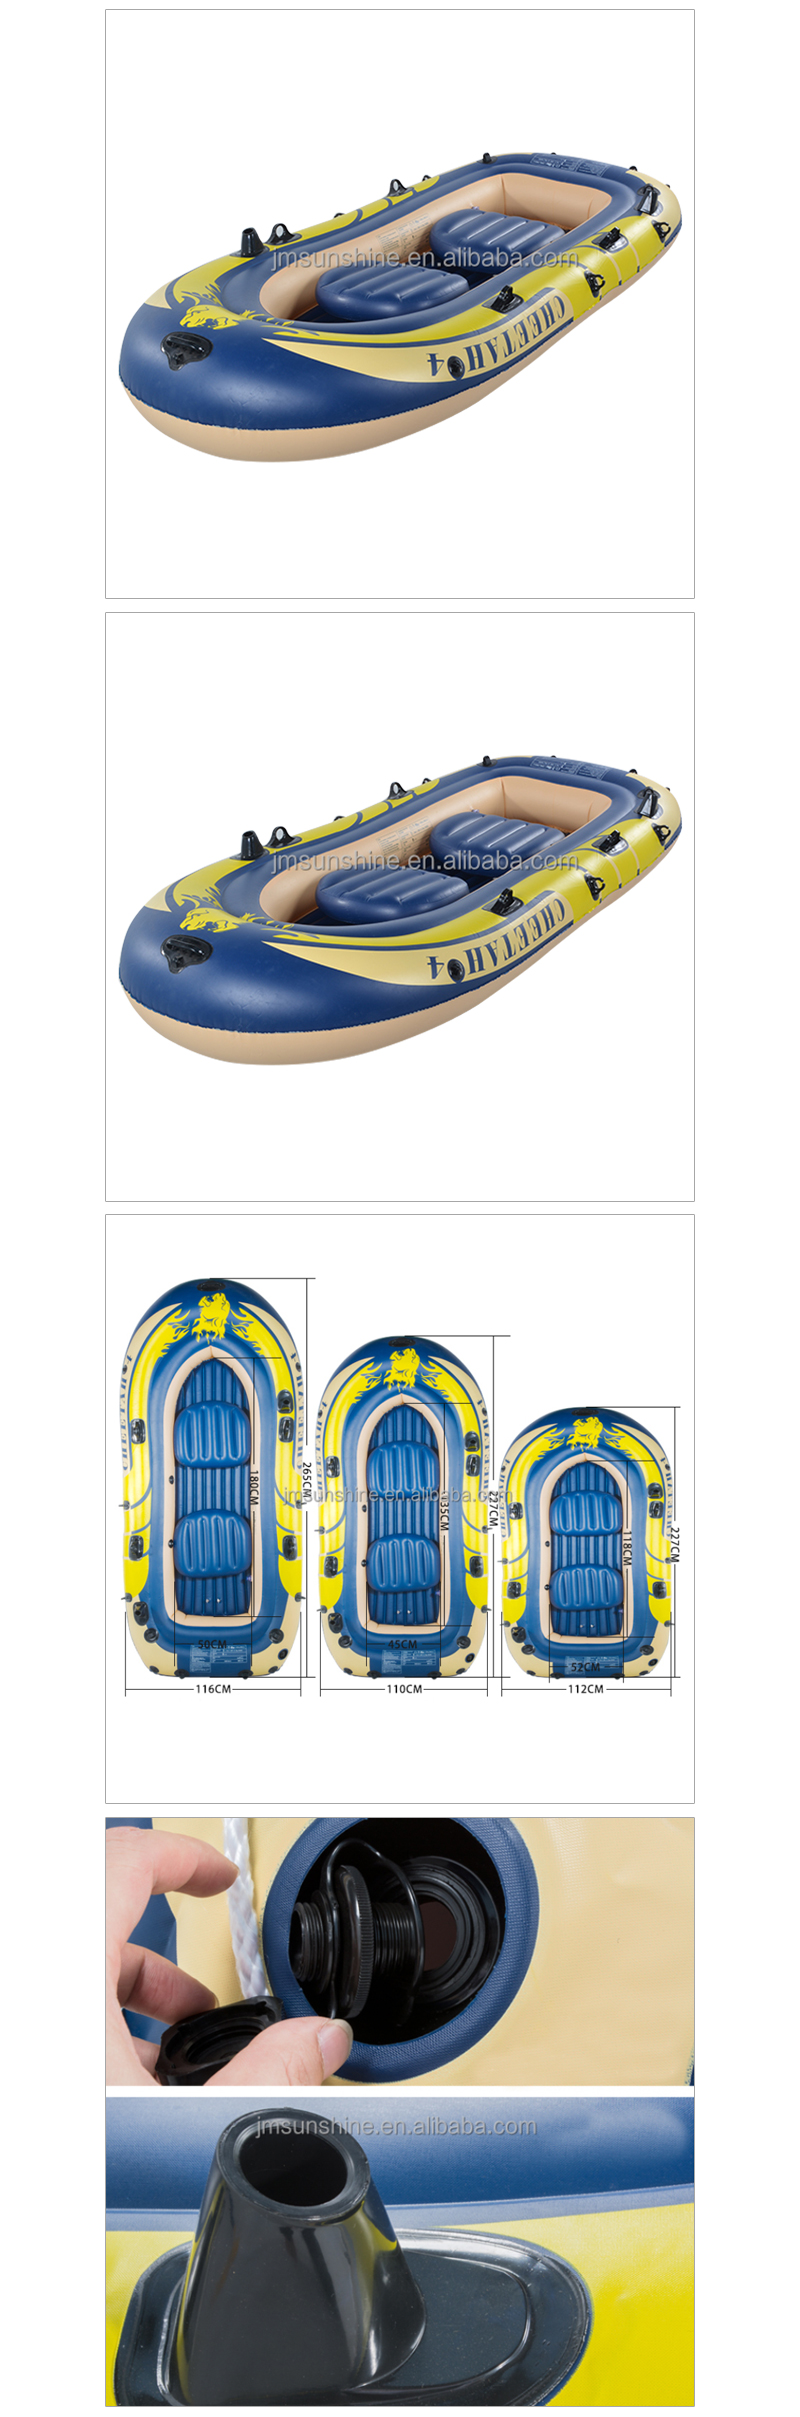 Inflatable Lake Ocean Boat Raft Set With Oars_02